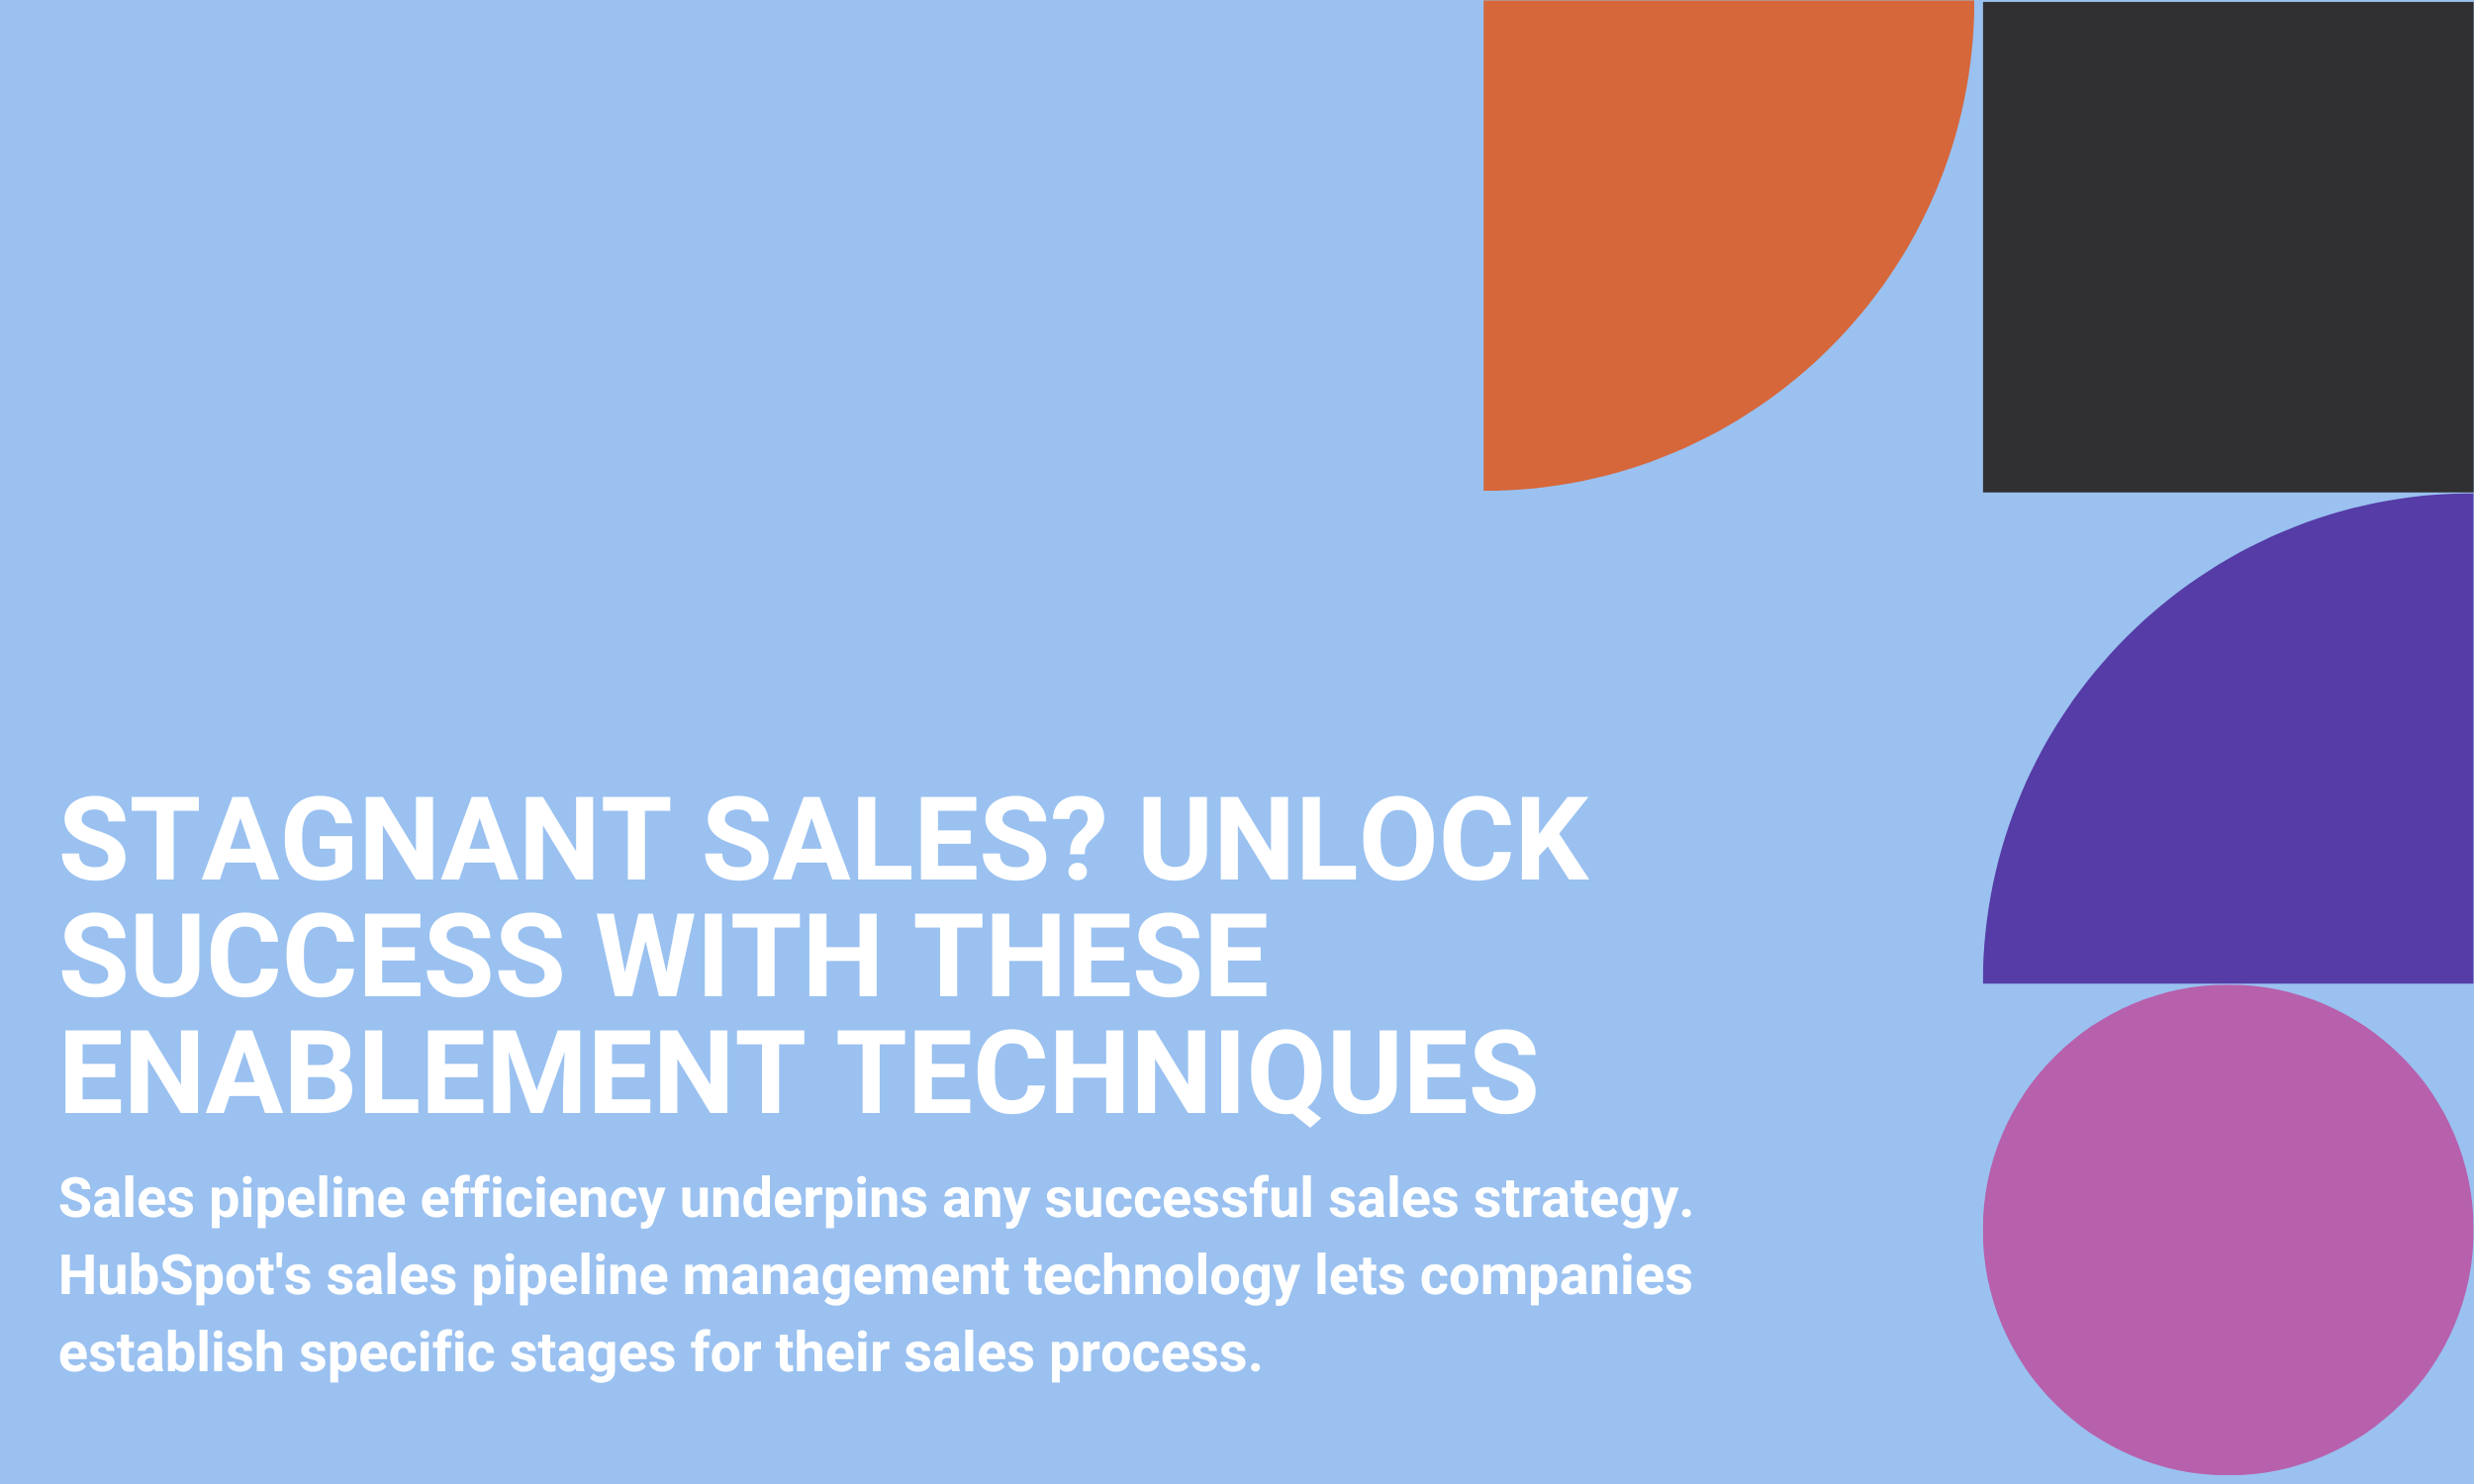 Stagnant Sales? Unlock Success with These Enablement Techniques